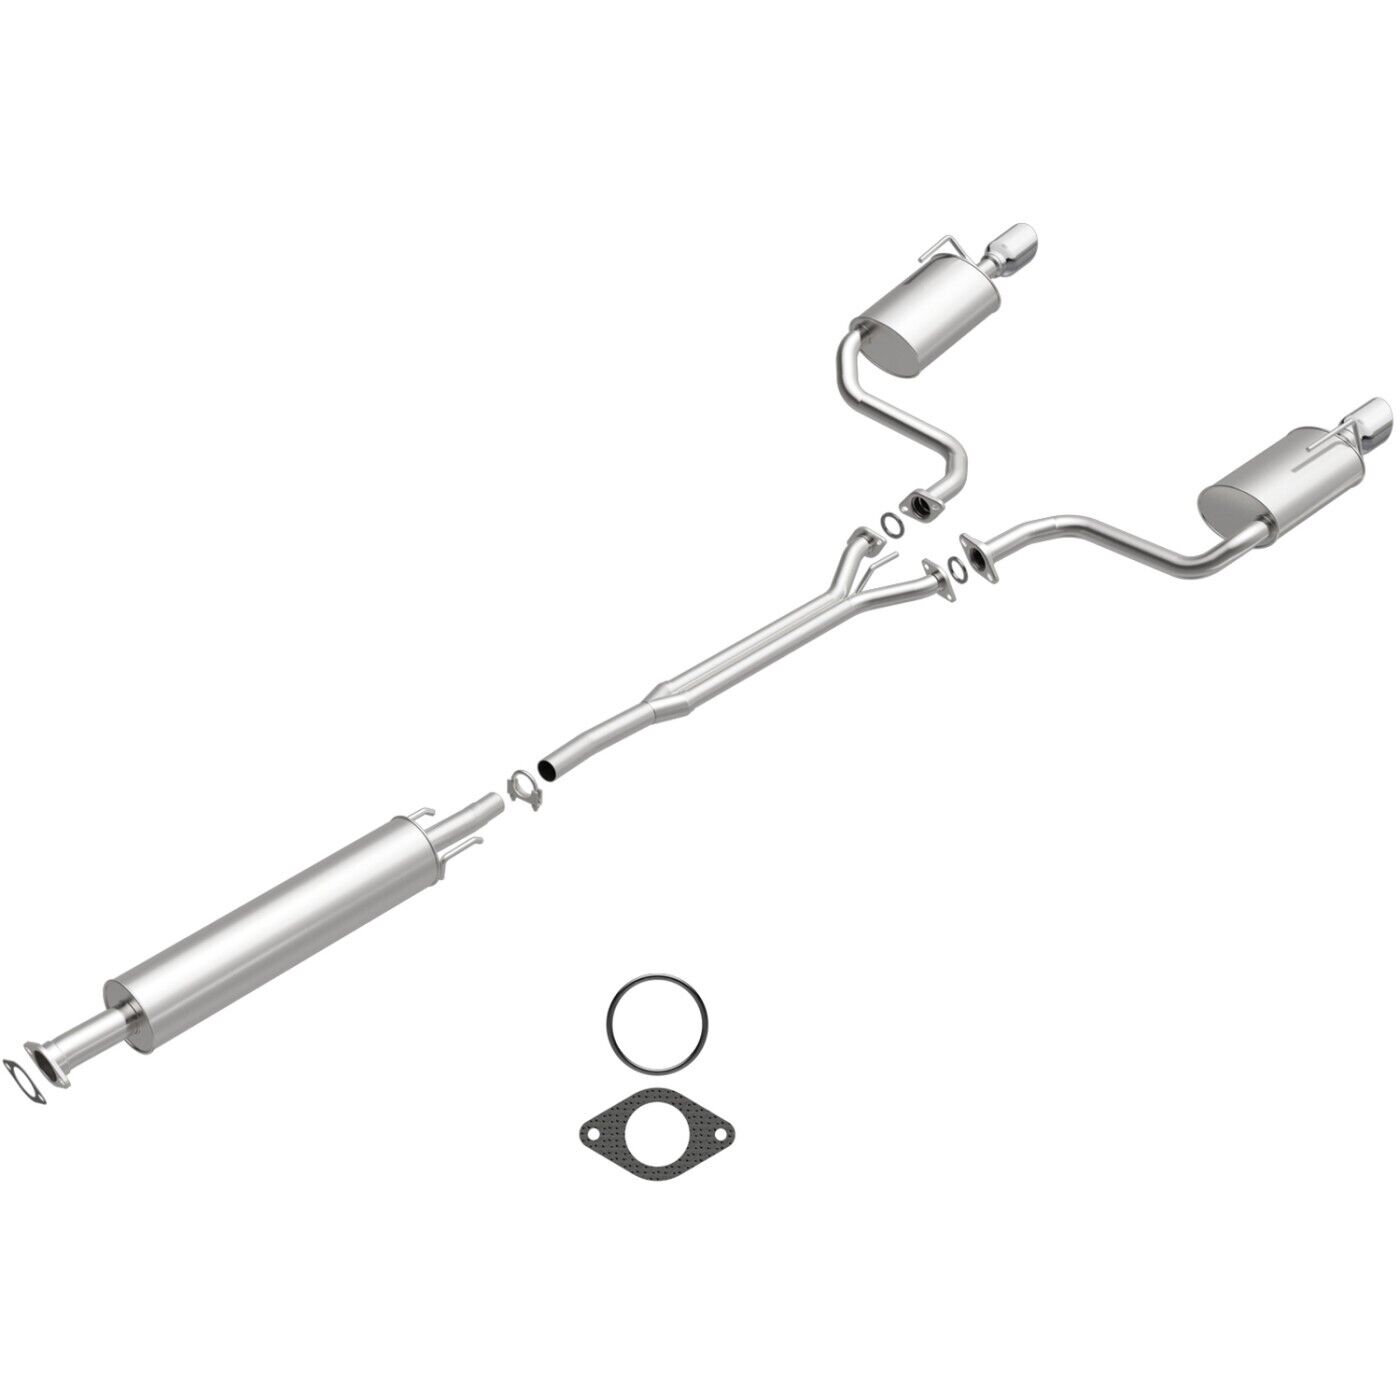 BRExhaust 106-0167 Exhaust Systems for Nissan Maxima 2009-2014,2016-2017